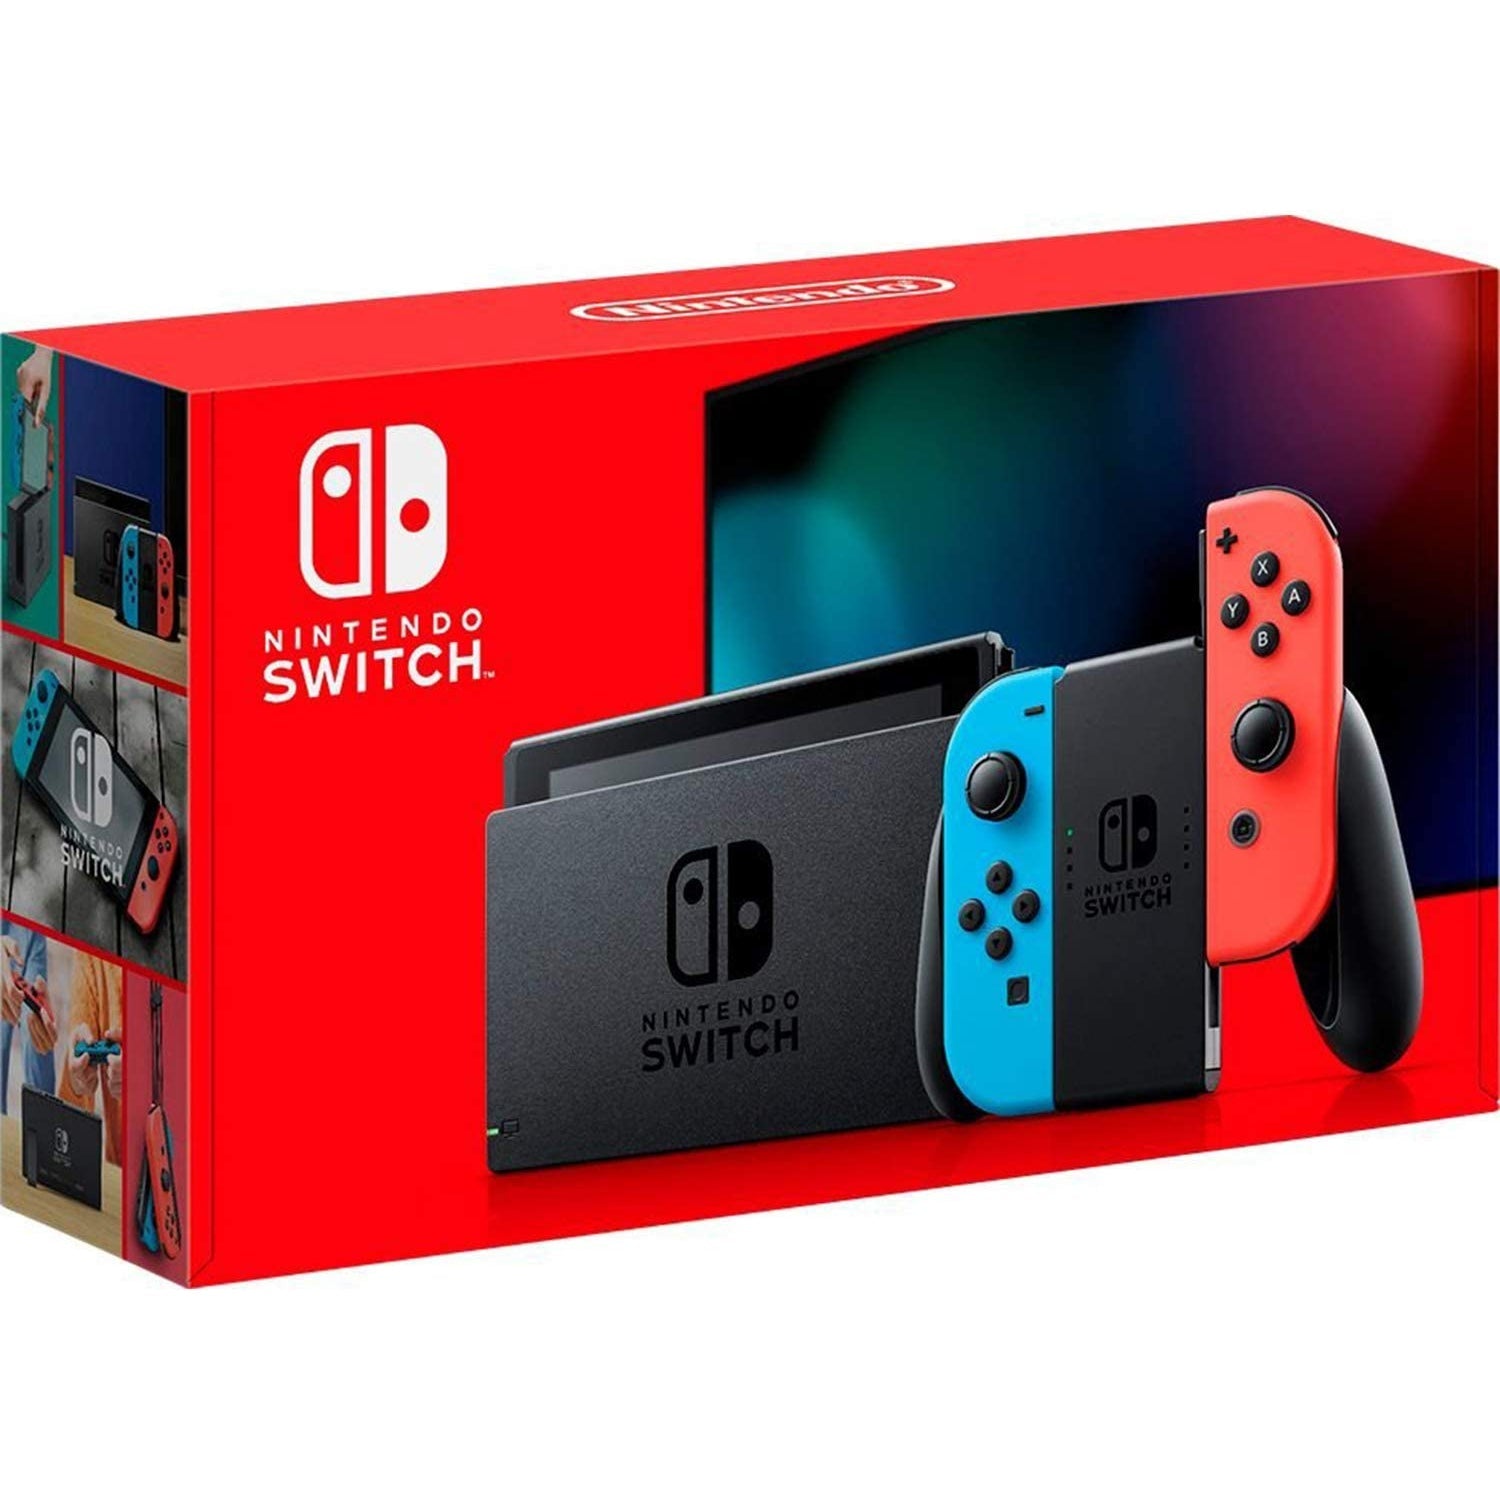 Nintendo Switch Console - Neon with improved battery